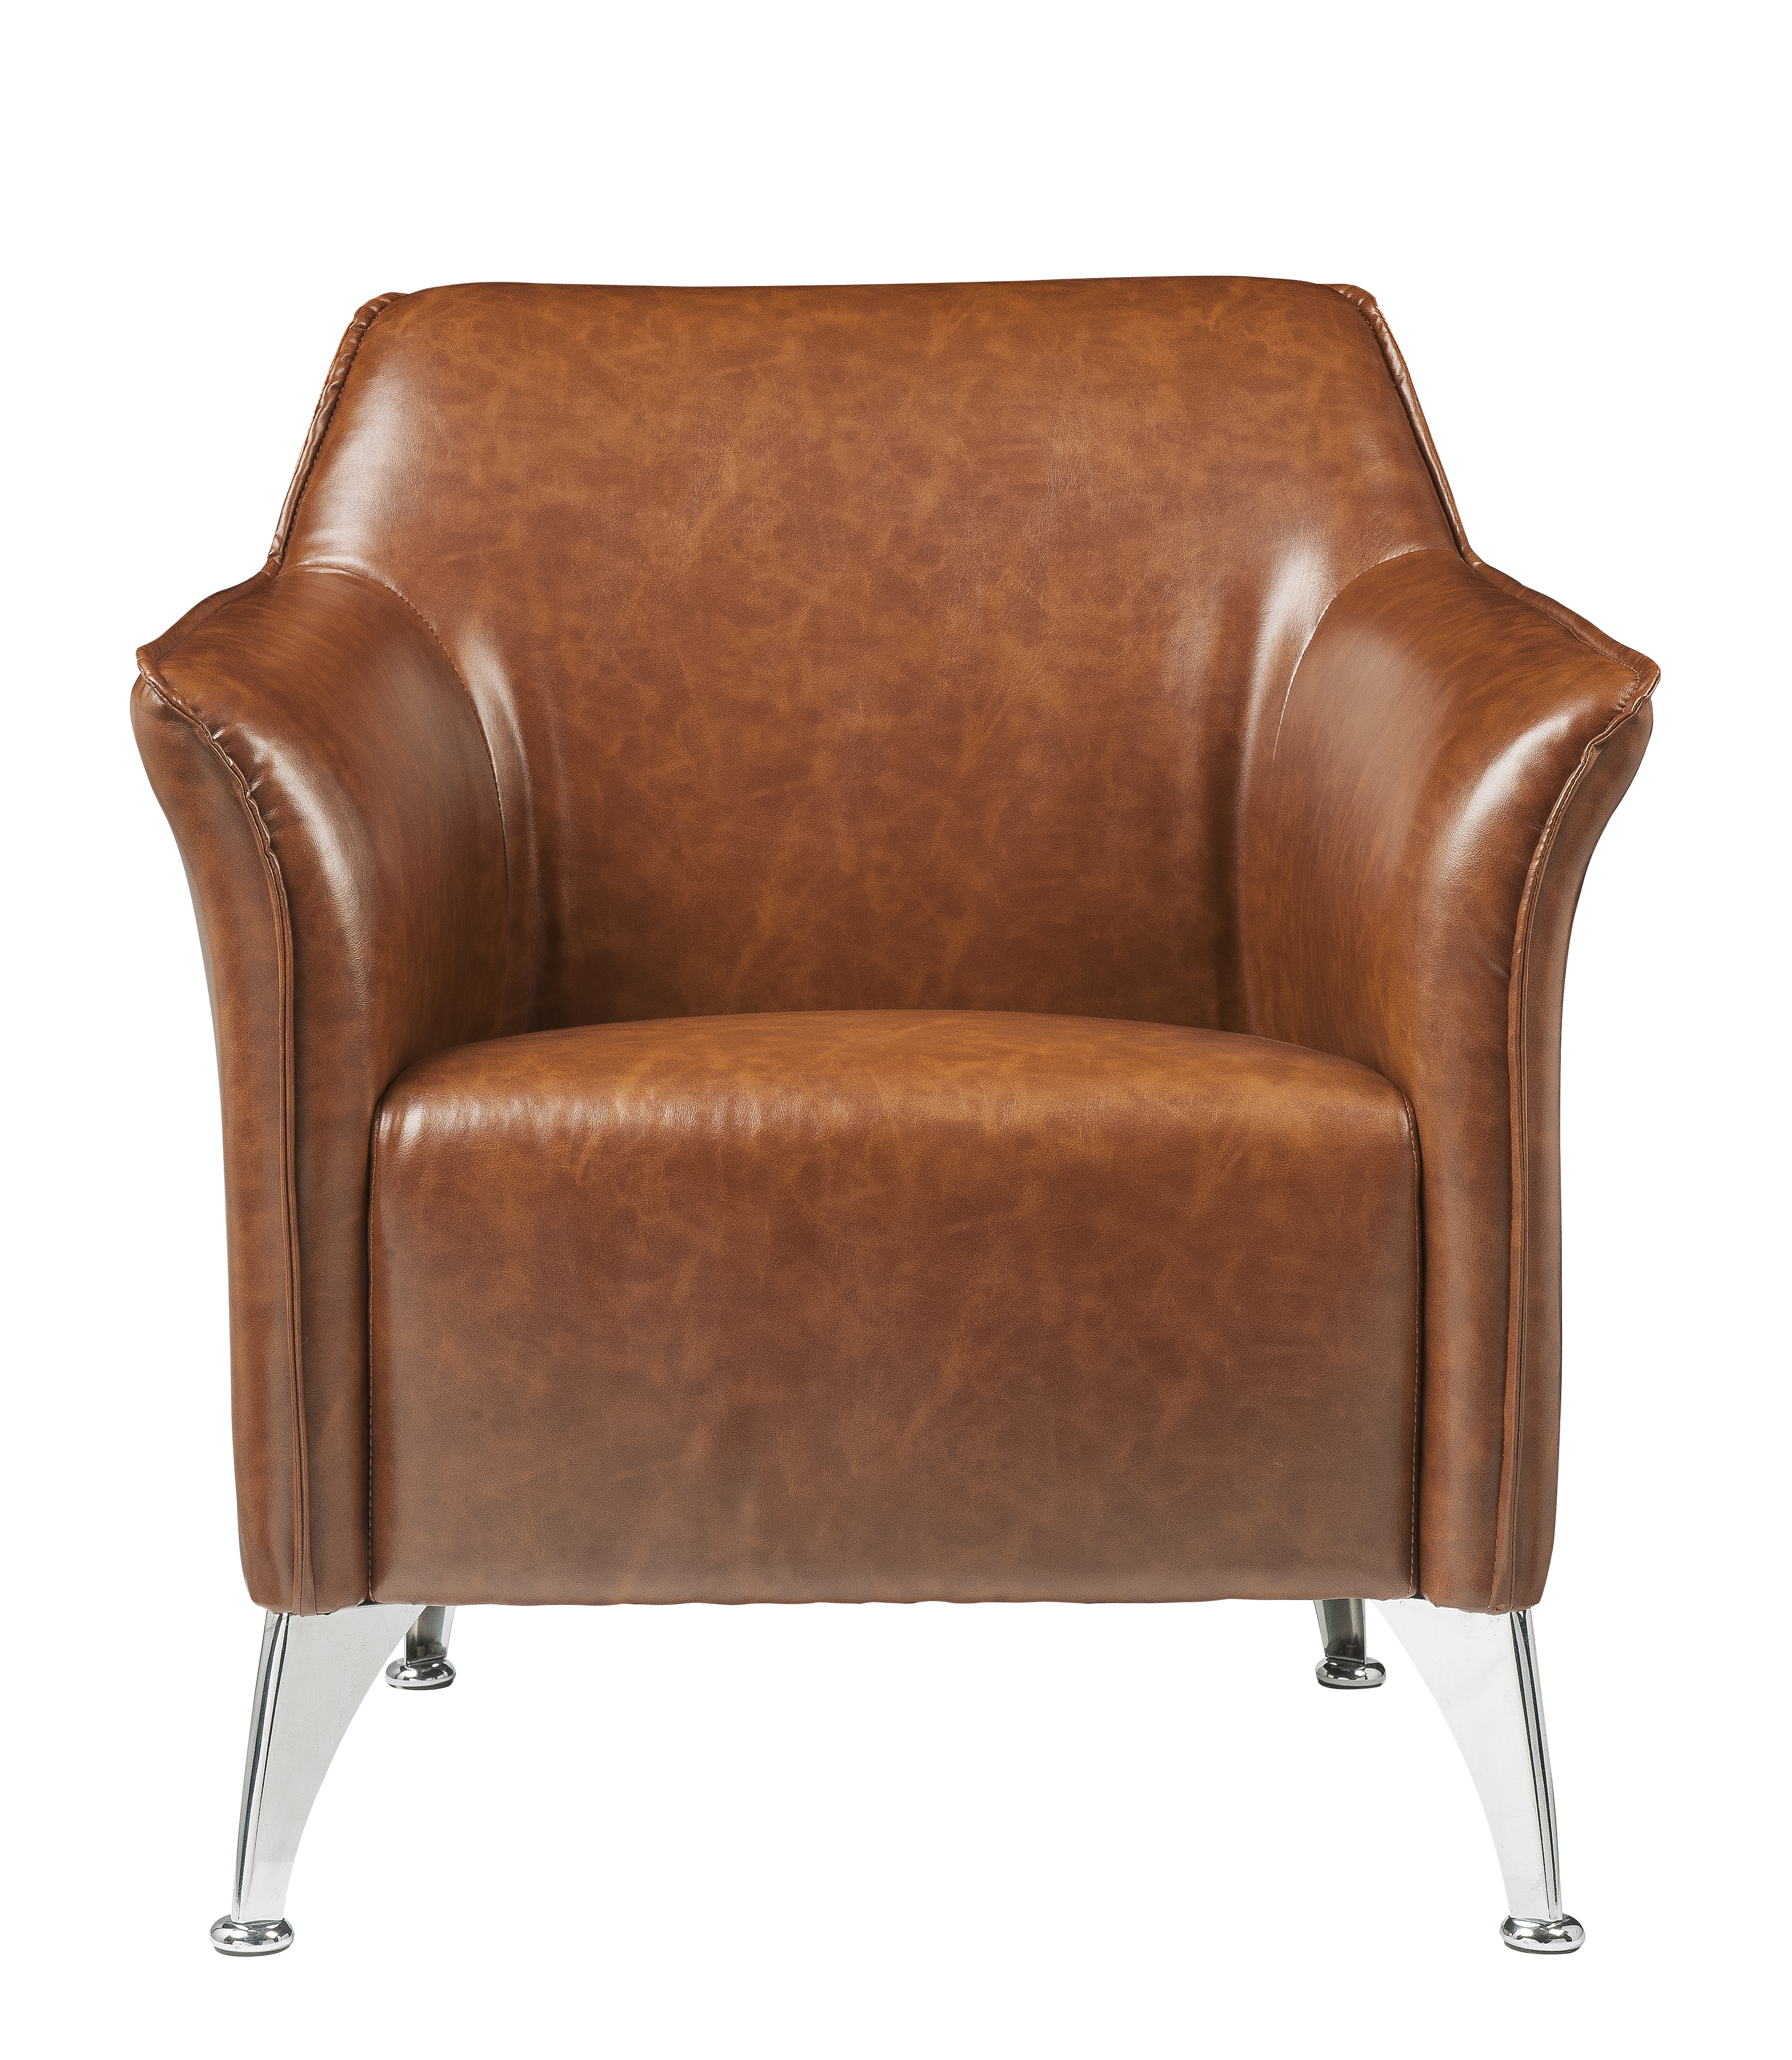 Leatherette Accent Chair With Track Armrest And Welt Trim Details, Brown- Saltoro Sherpi